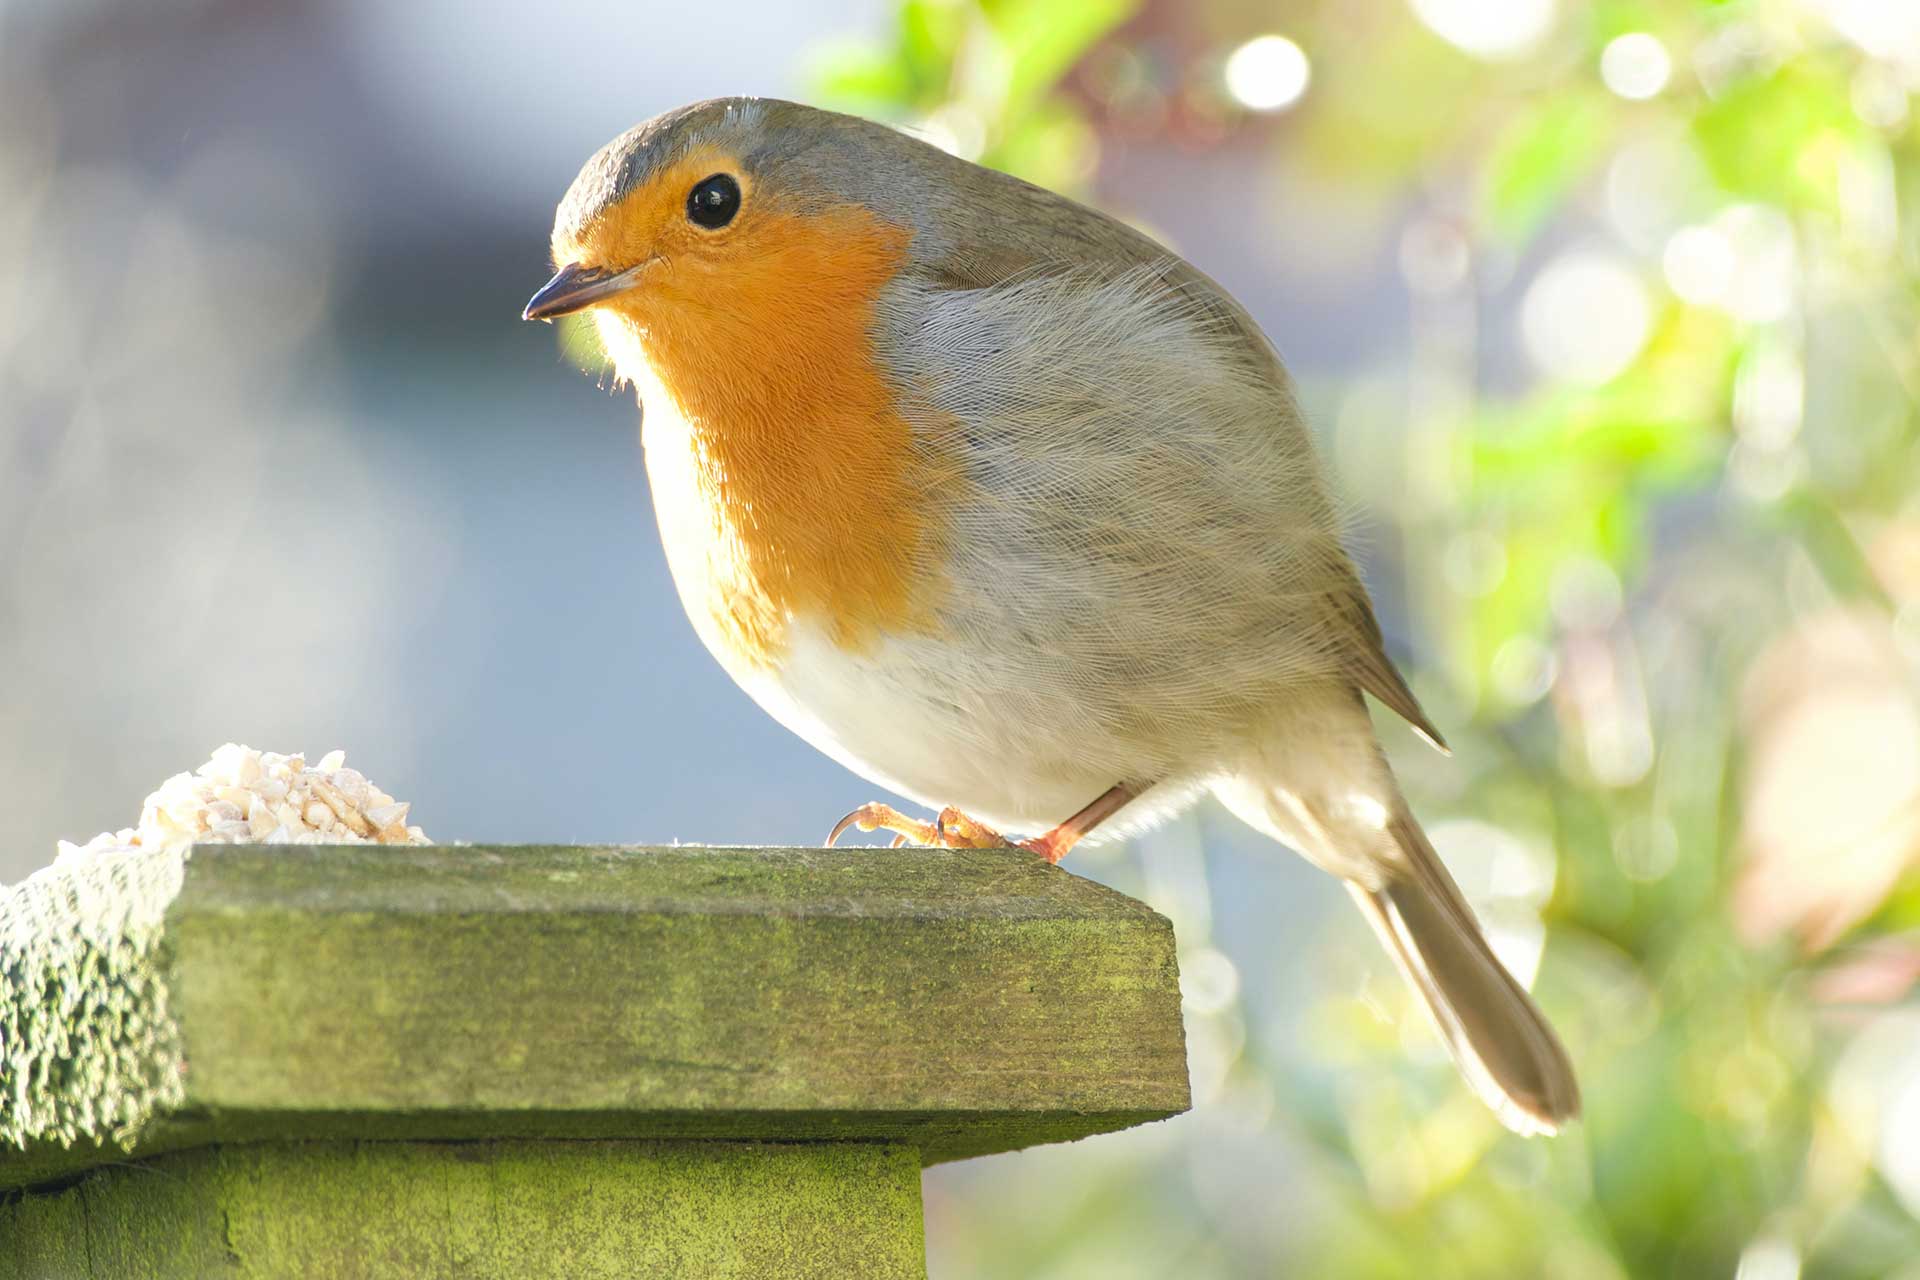 We have many friendly Robins who visit the lodges, some of whom will even eat food from your hand!